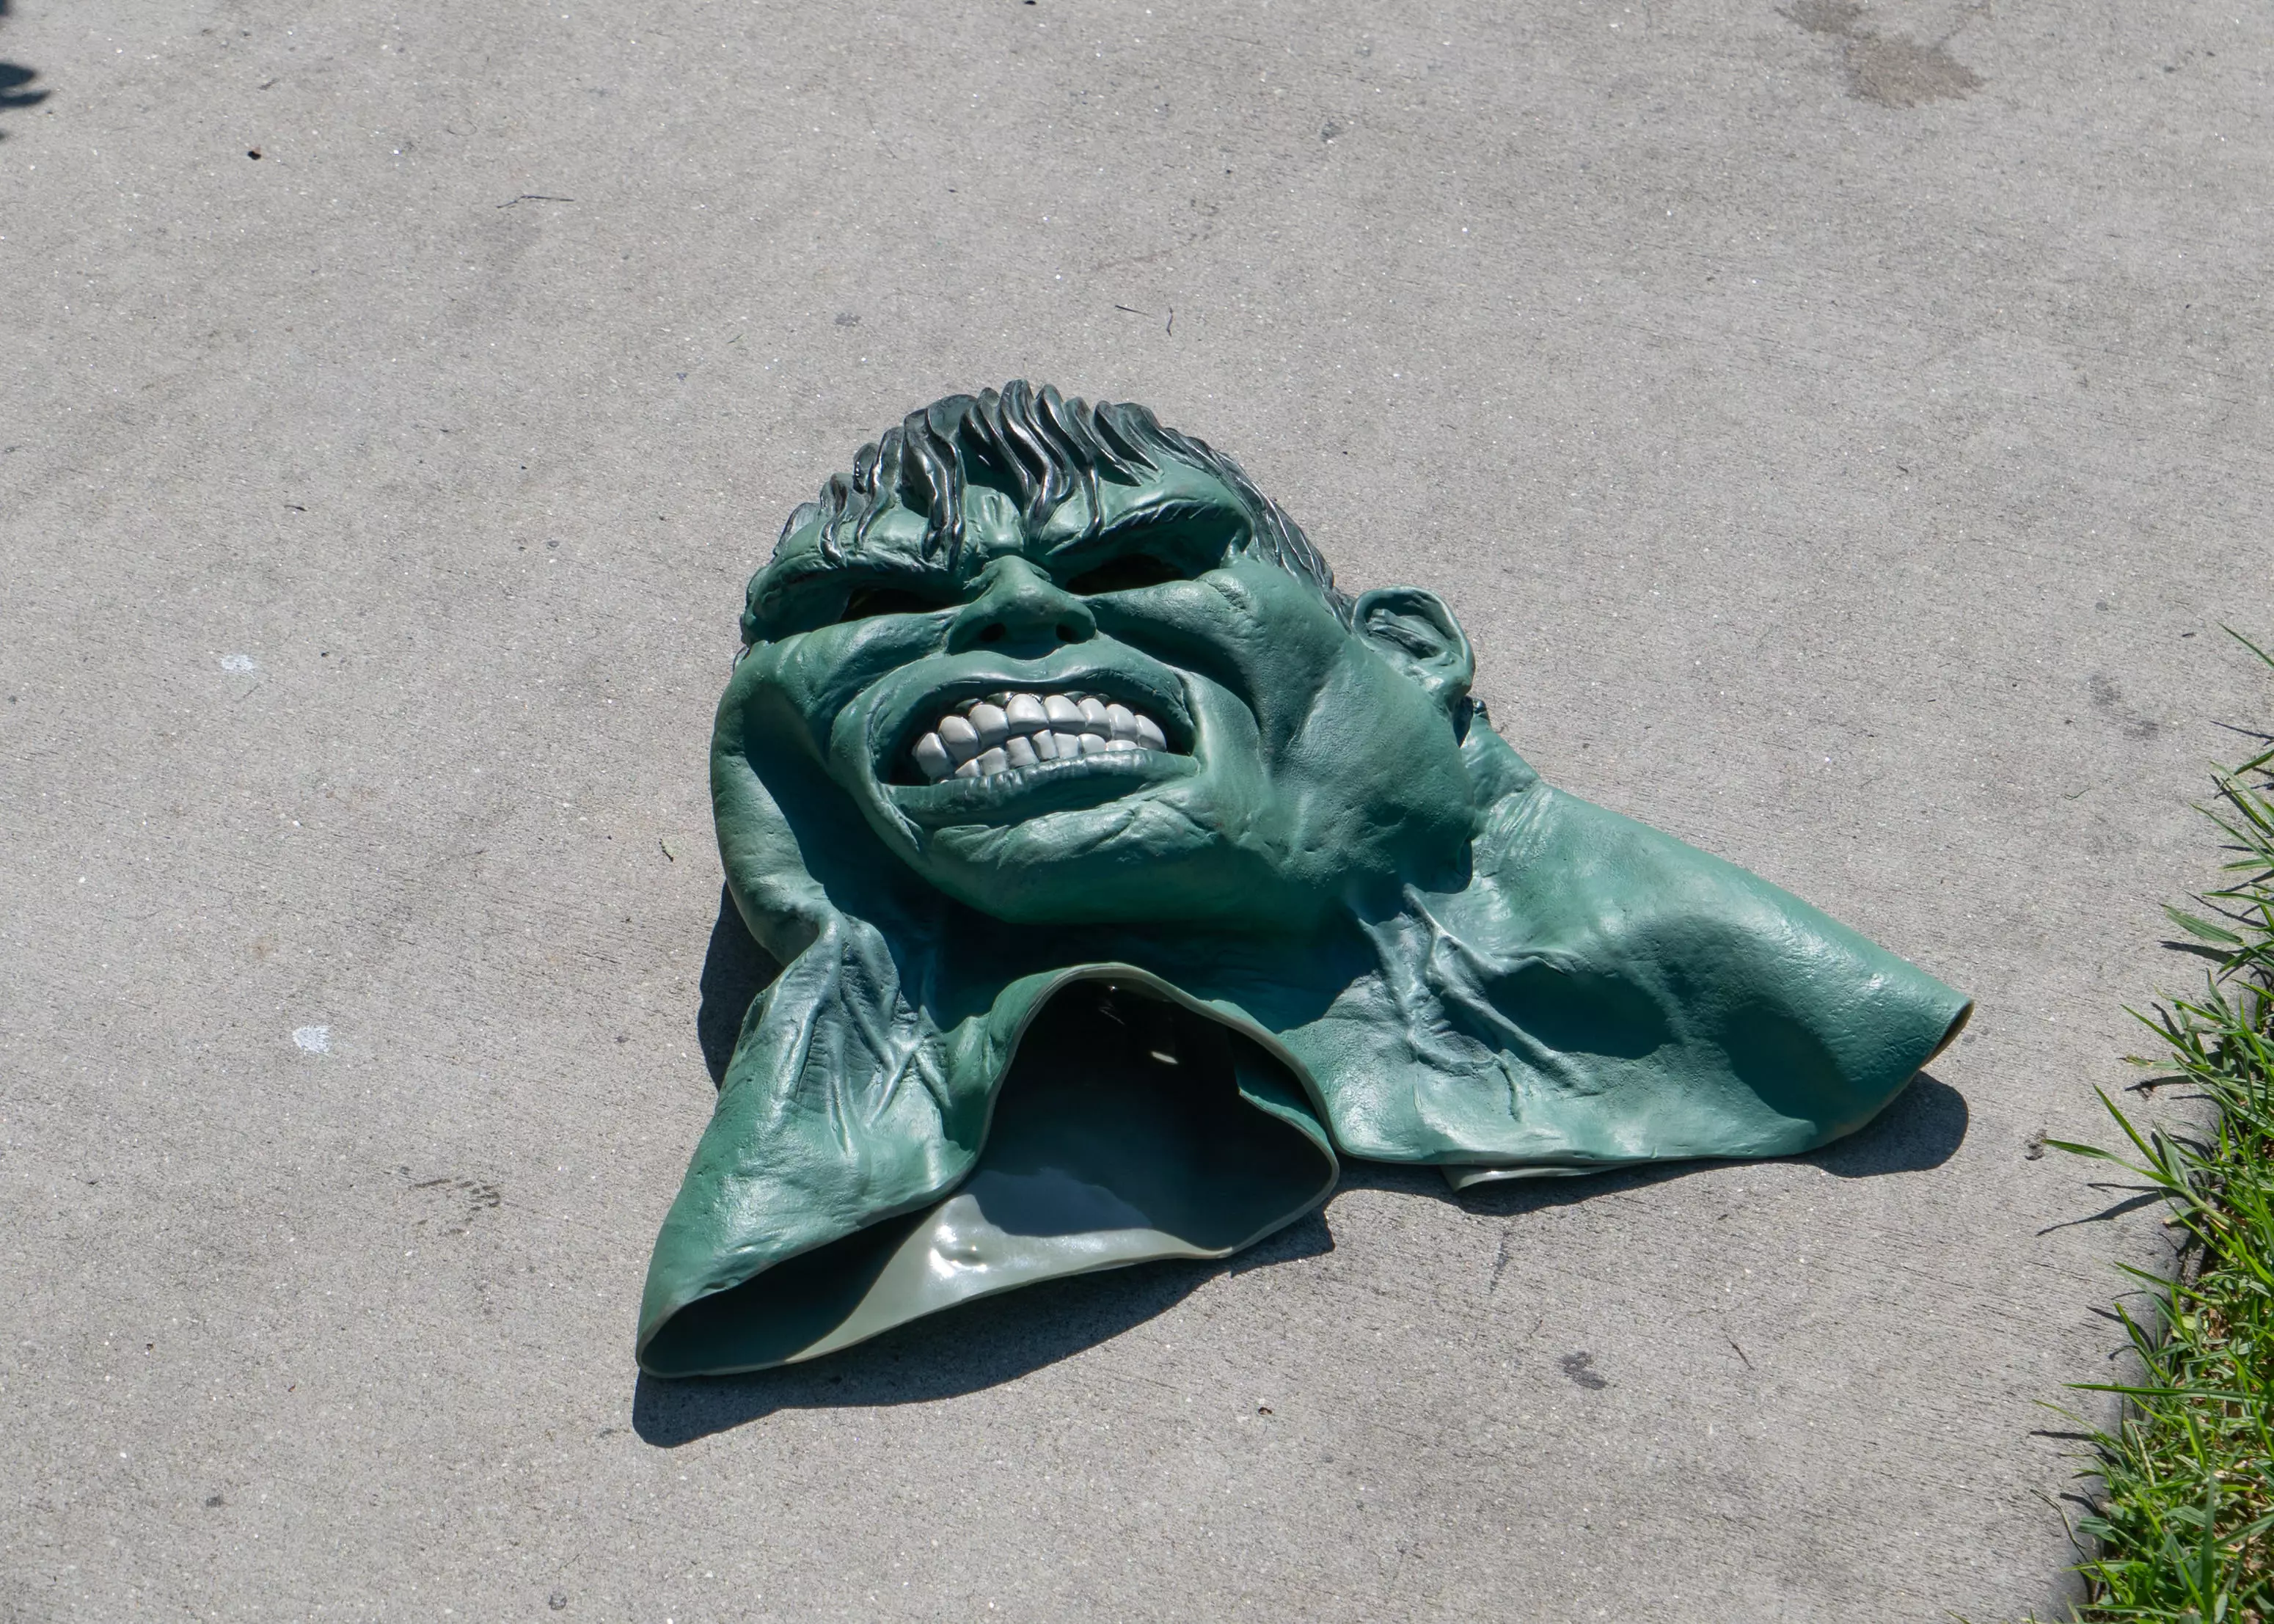 An Incredible Hulk mask was found a few yards away from the vandalised star.